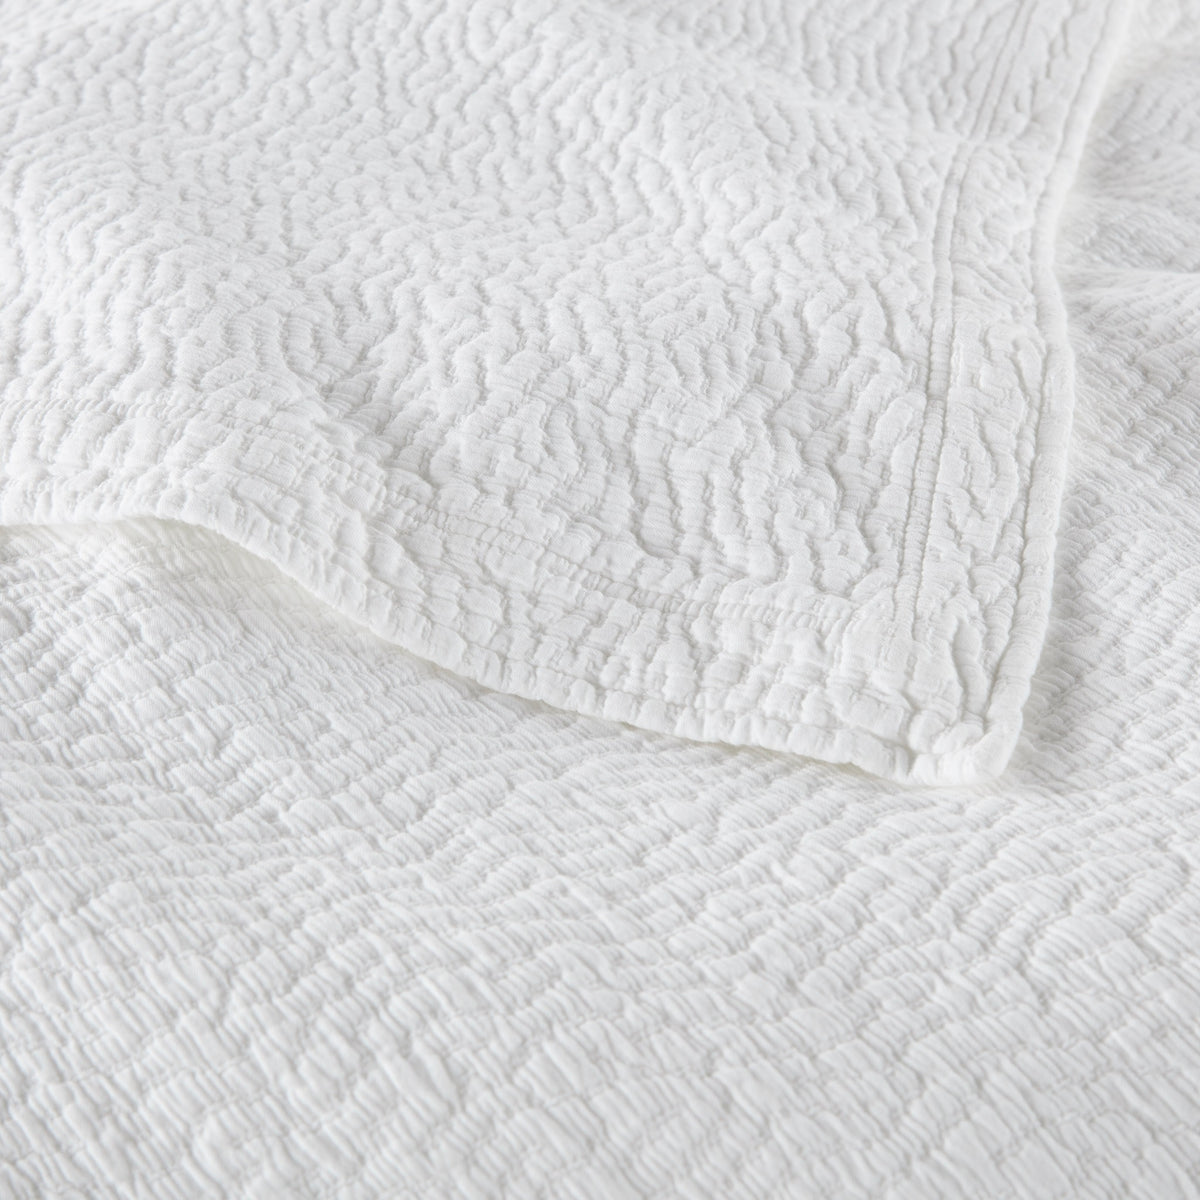 Detail Shot of Peacock Alley Mia Stonewashed Matelassé Bedding in Color White